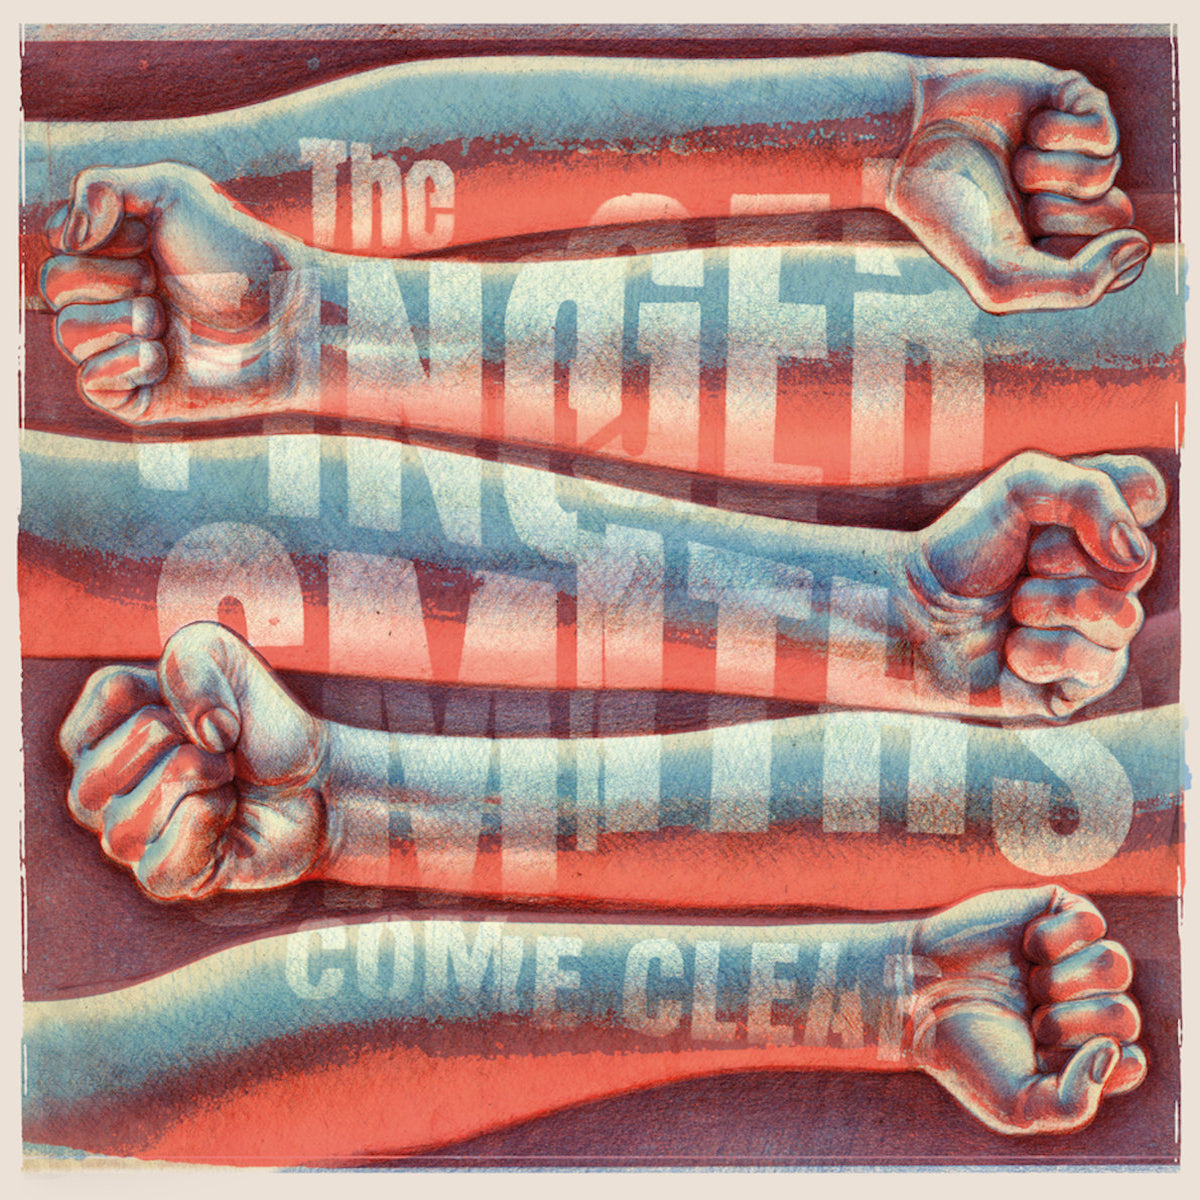 Fingersmiths- Come Clear LP ~GHOST HIGHWAY RECORDINGS!